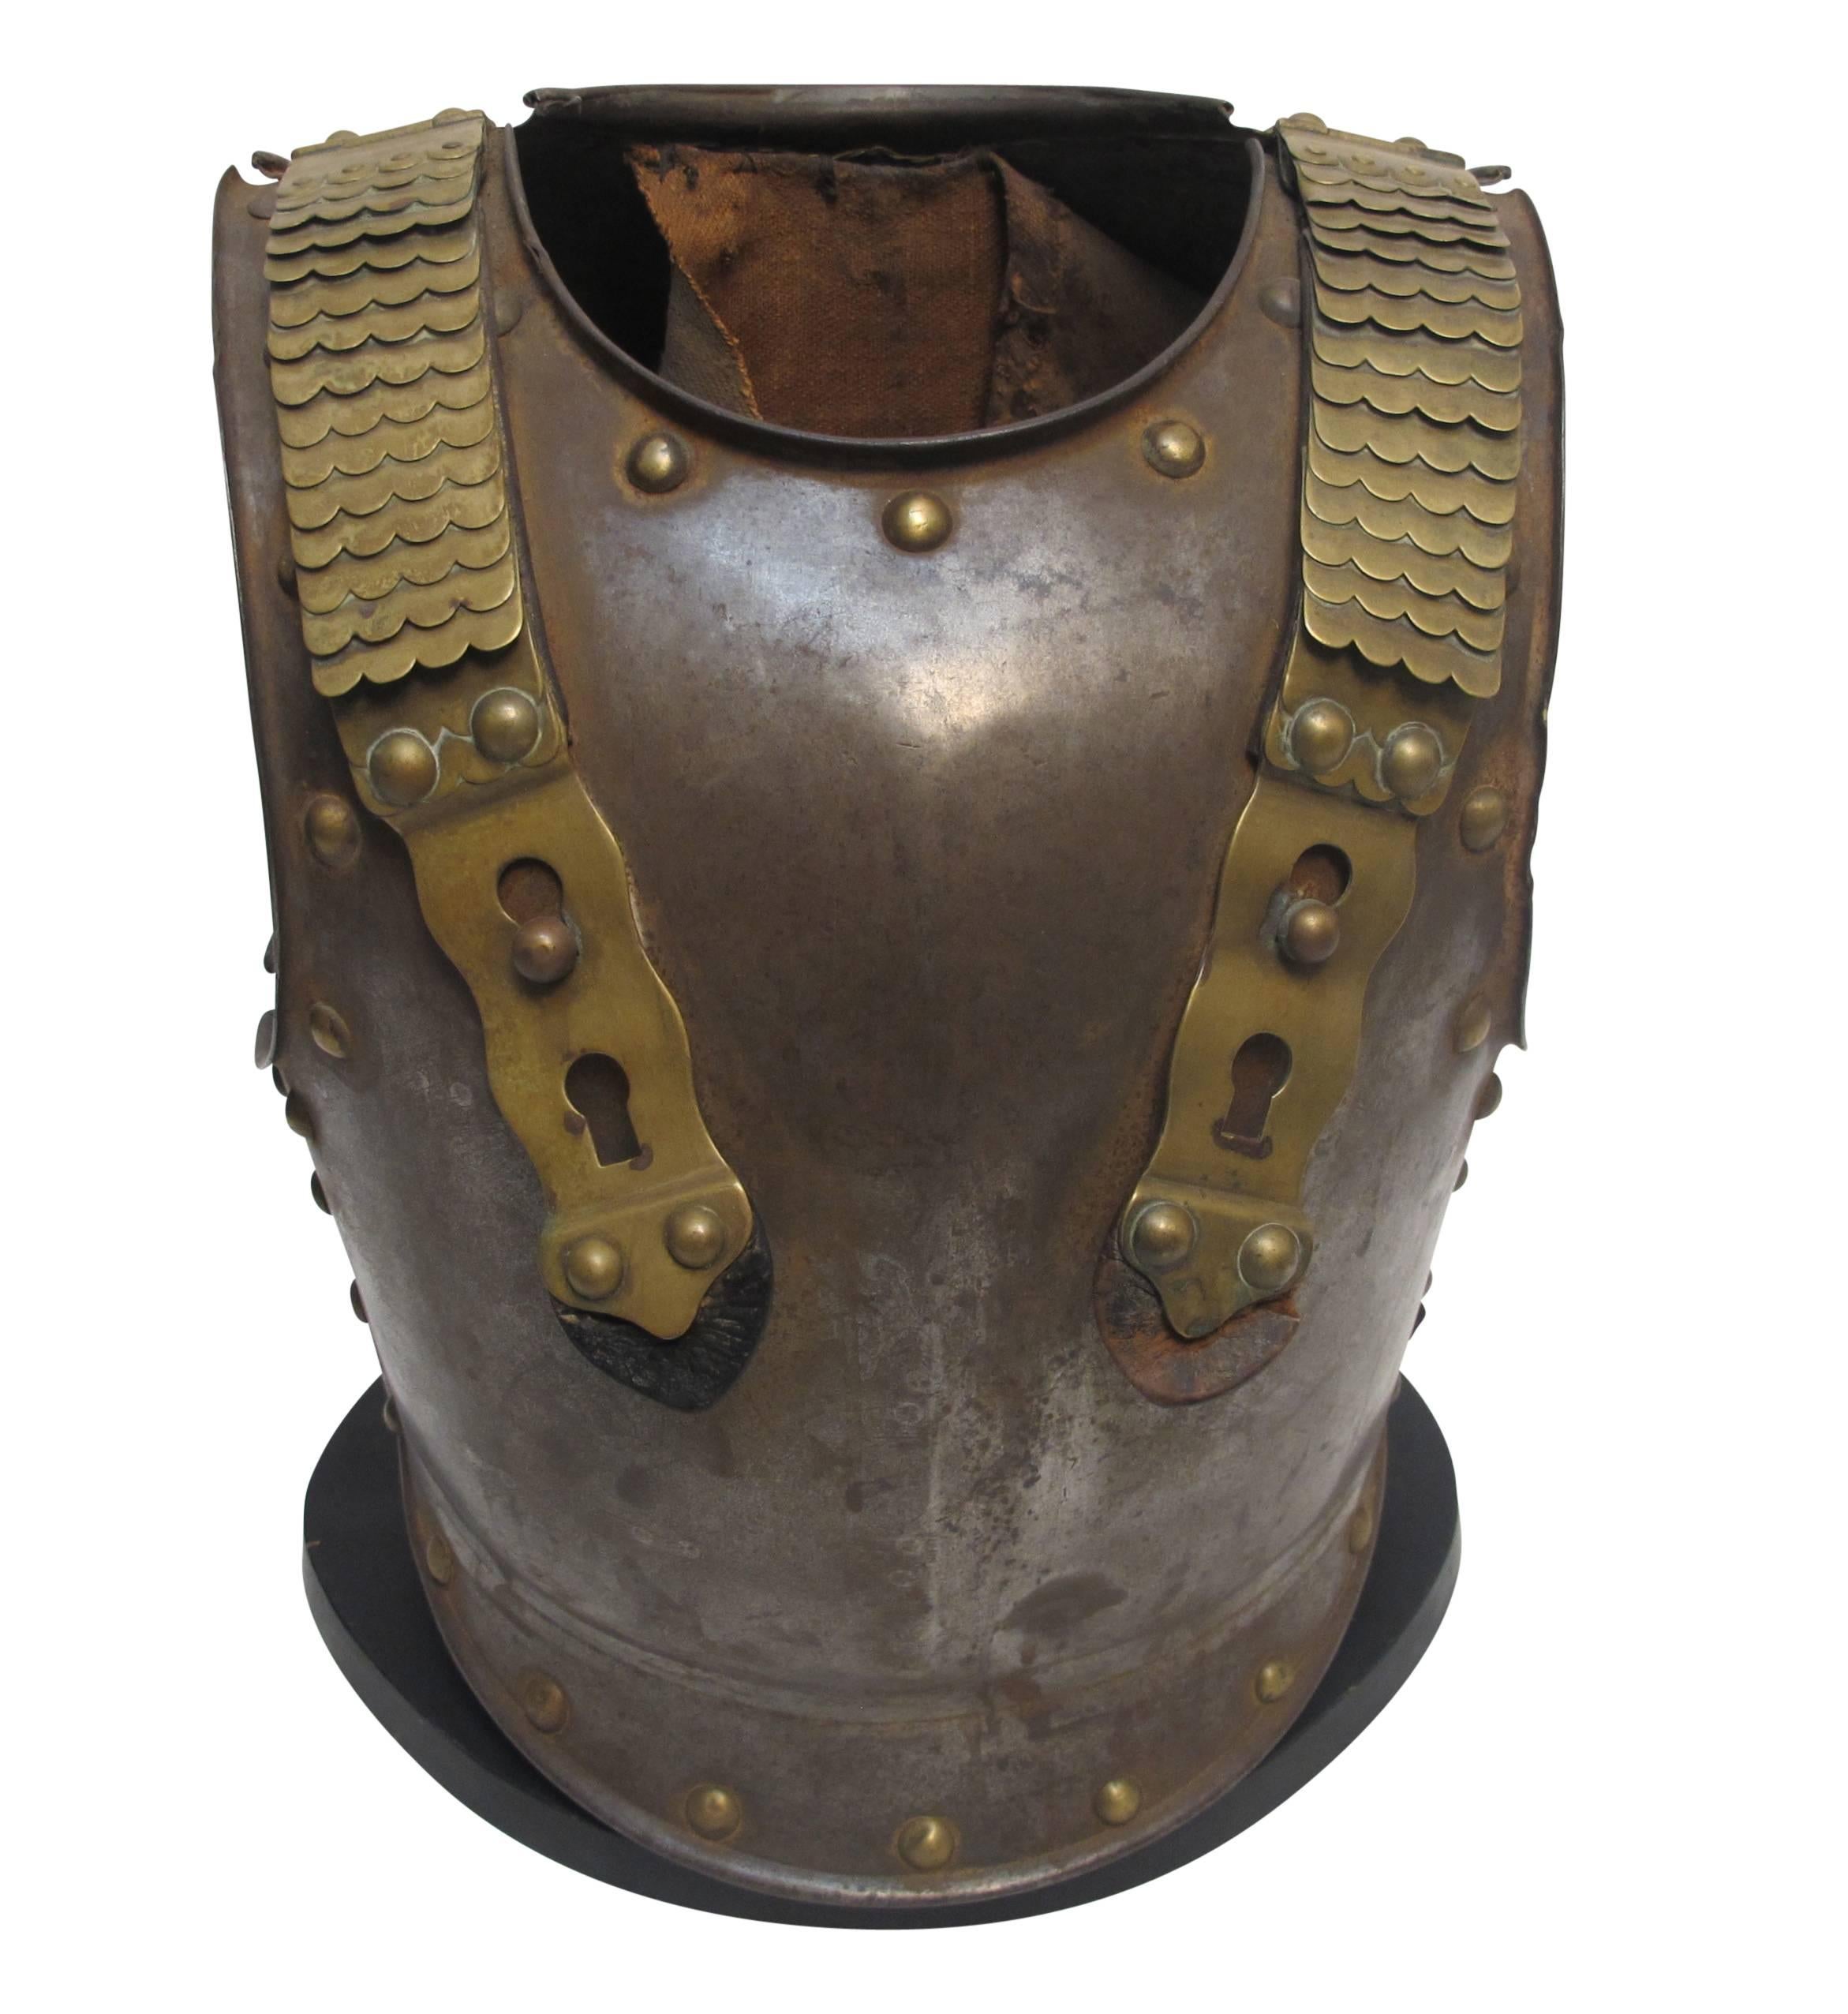 French military steel and brass breast plate body armor, having a genuine muscat ball dent, France, late 18th-early 19th century.